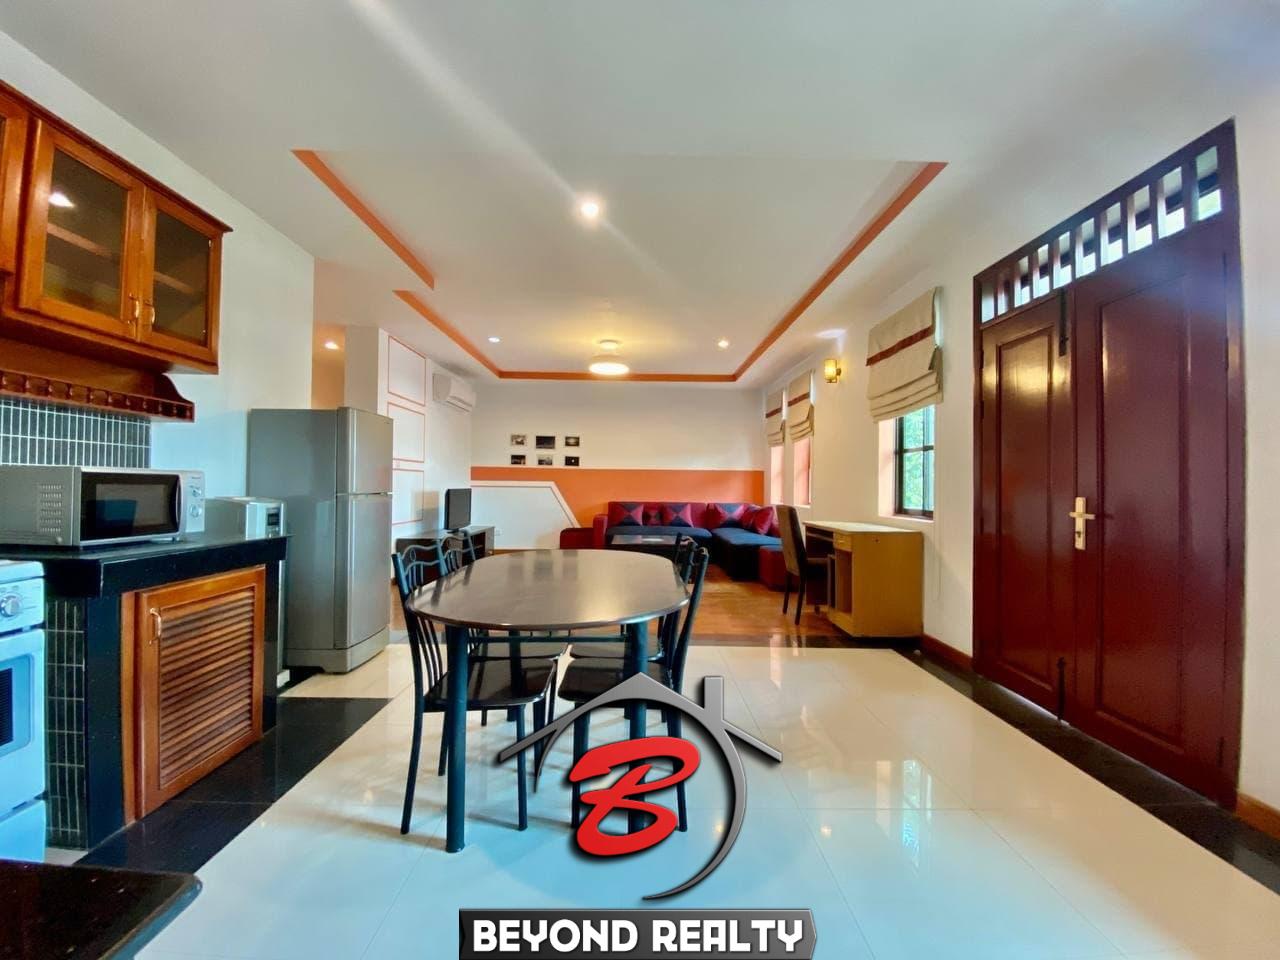 the living room of the 3-bedroom serviced flat for rent near Wat Phnom in Daun penh in Phnom Penh Cambodia